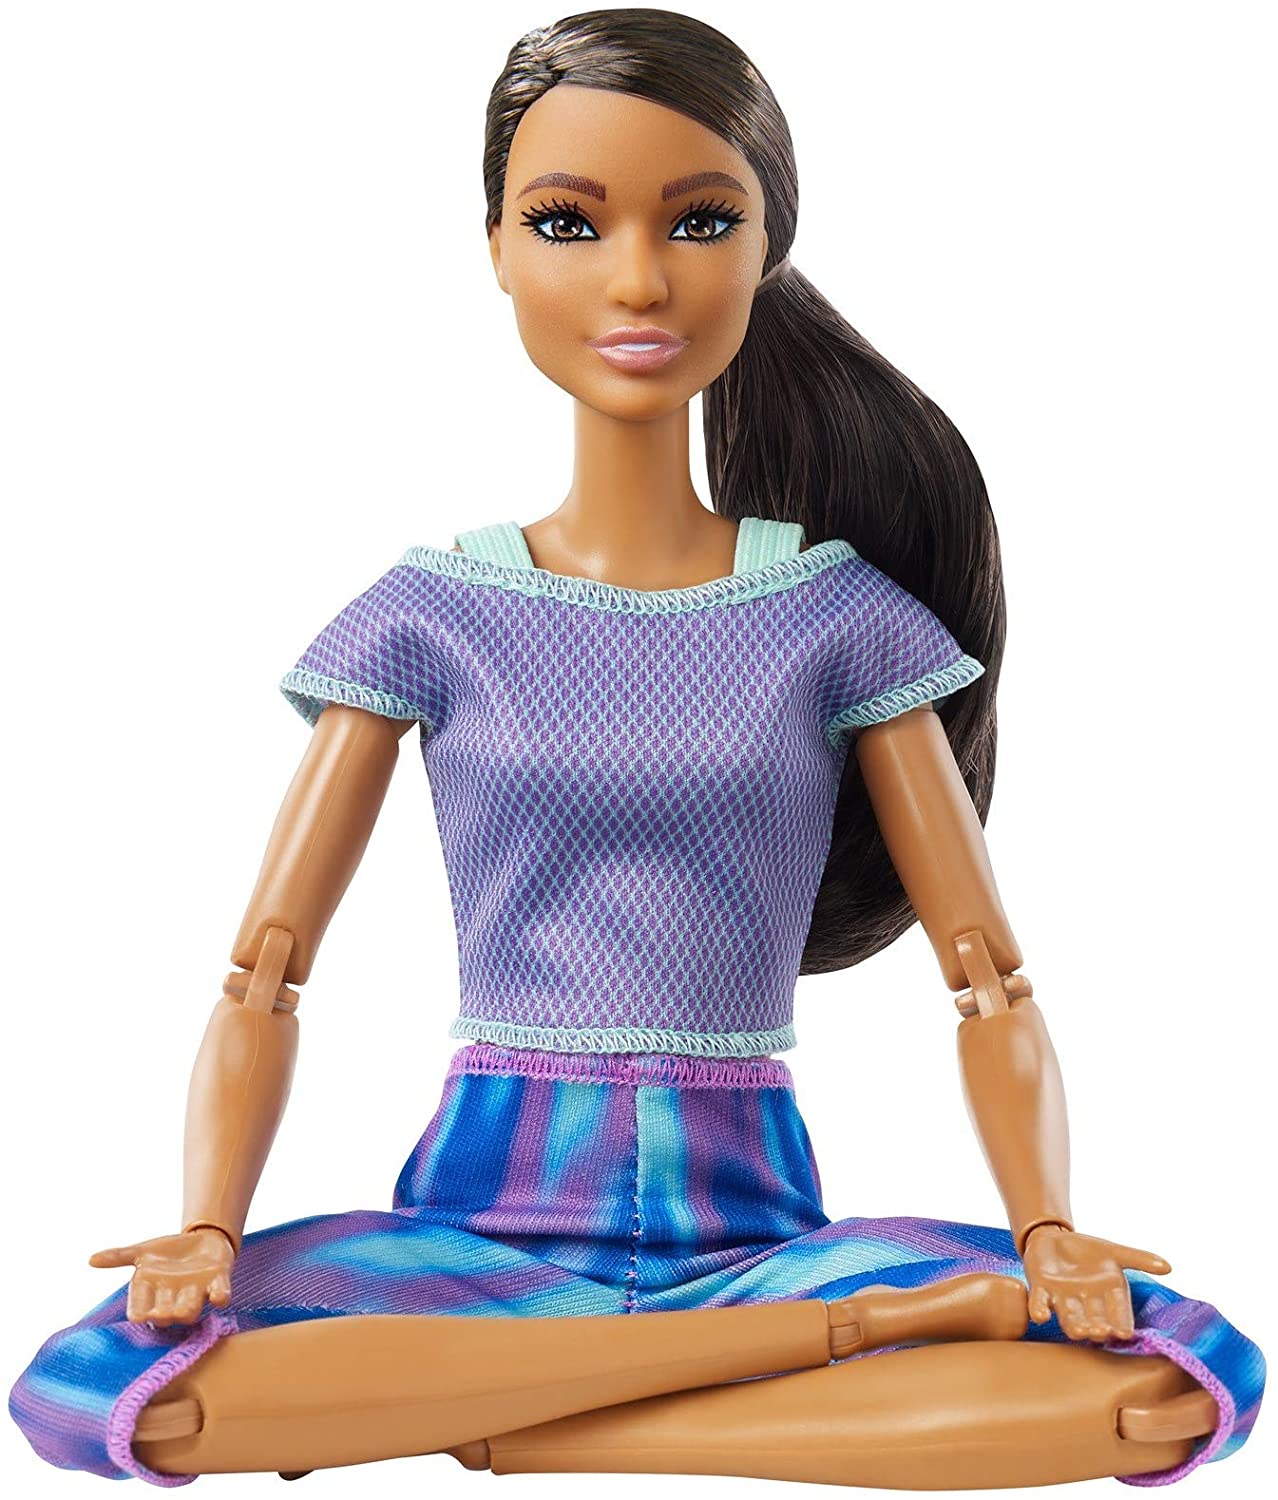 Made to Move Barbie Doll Yoga Barbie Purple Top New in Box NRFB